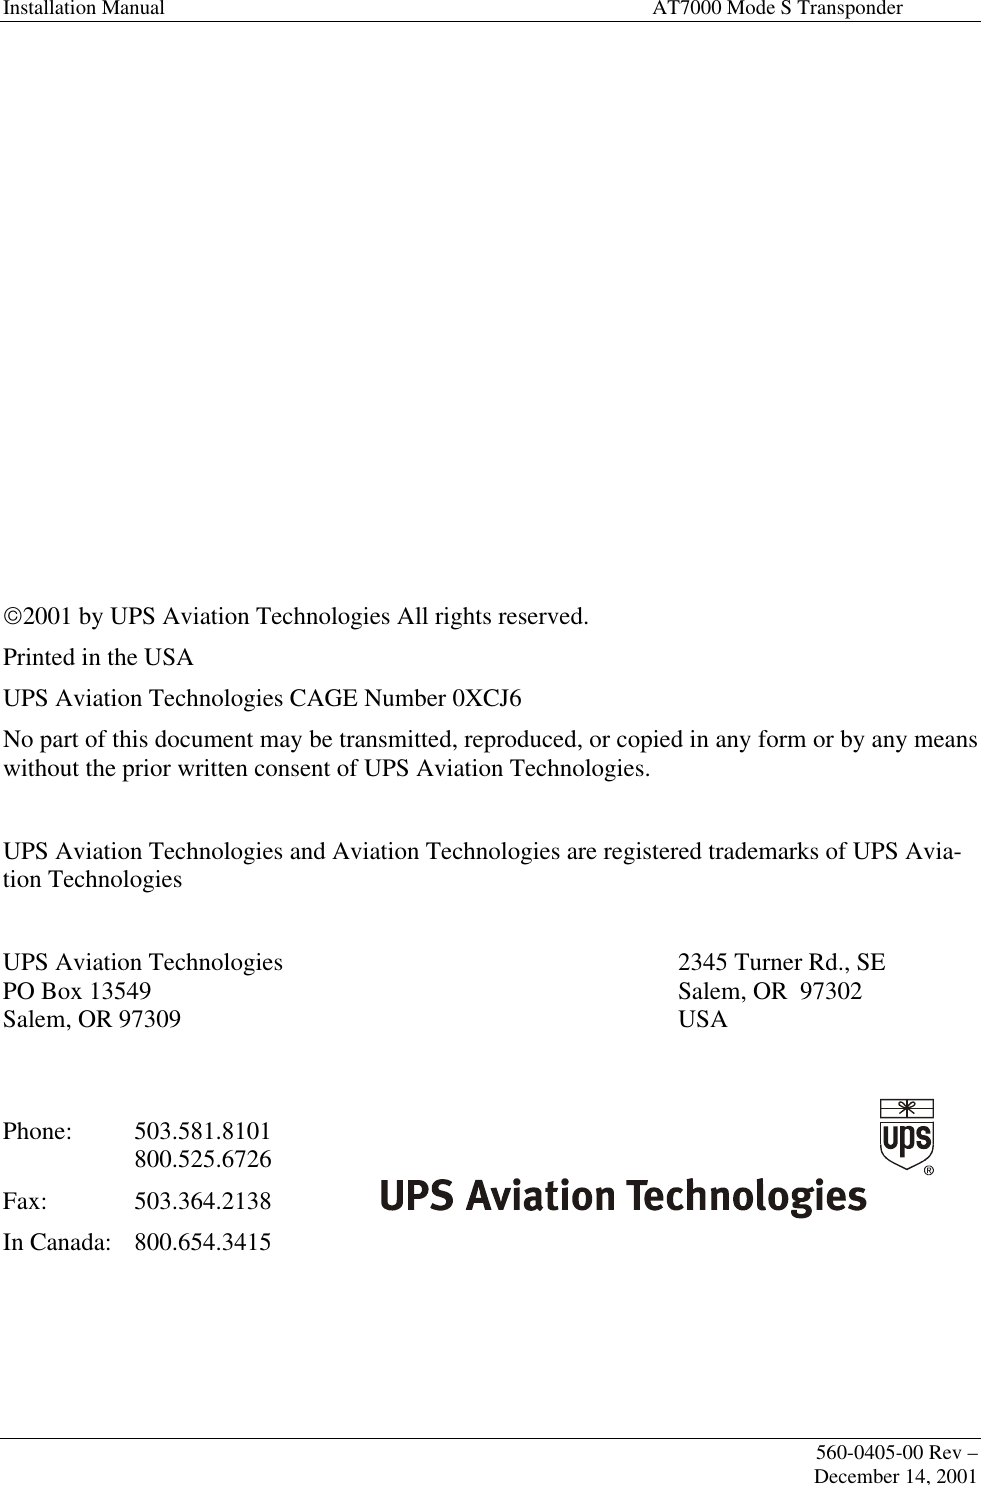 Installation Manual AT7000 Mode S Transponder560-0405-00 Rev –December 14, 20012001 by UPS Aviation Technologies All rights reserved.Printed in the USAUPS Aviation Technologies CAGE Number 0XCJ6No part of this document may be transmitted, reproduced, or copied in any form or by any meanswithout the prior written consent of UPS Aviation Technologies.UPS Aviation Technologies and Aviation Technologies are registered trademarks of UPS Avia-tion TechnologiesUPS Aviation Technologies 2345 Turner Rd., SEPO Box 13549 Salem, OR  97302Salem, OR 97309 USAPhone:  503.581.8101800.525.6726Fax:  503.364.2138In Canada:  800.654.3415